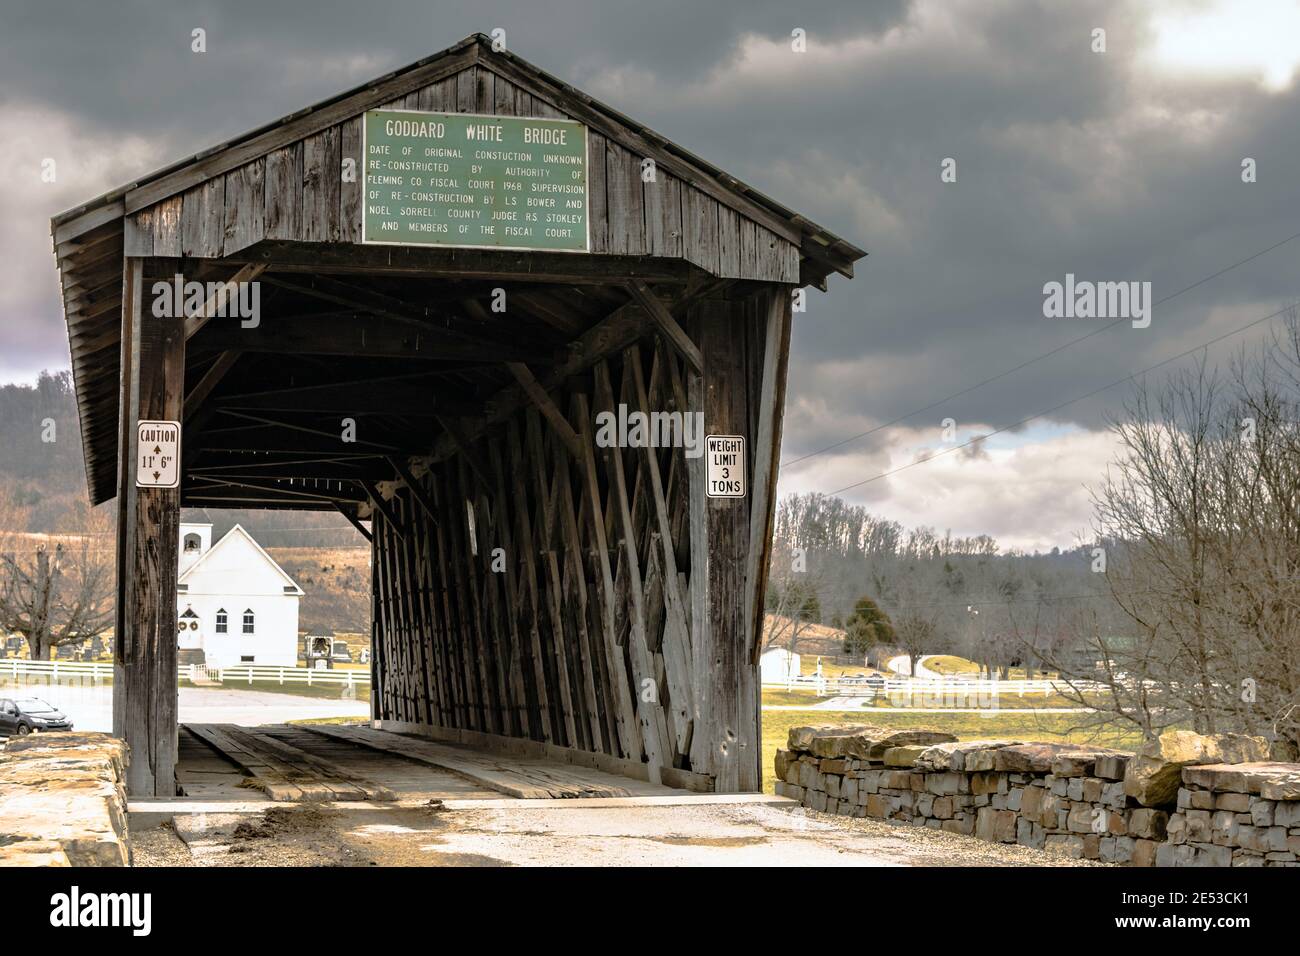 February 26, 2016: Goddard, Kentucky - Goddard White Bridge the only surviving example of Ithiel Town Lattice design in Kentucky. The timbers are join Stock Photo